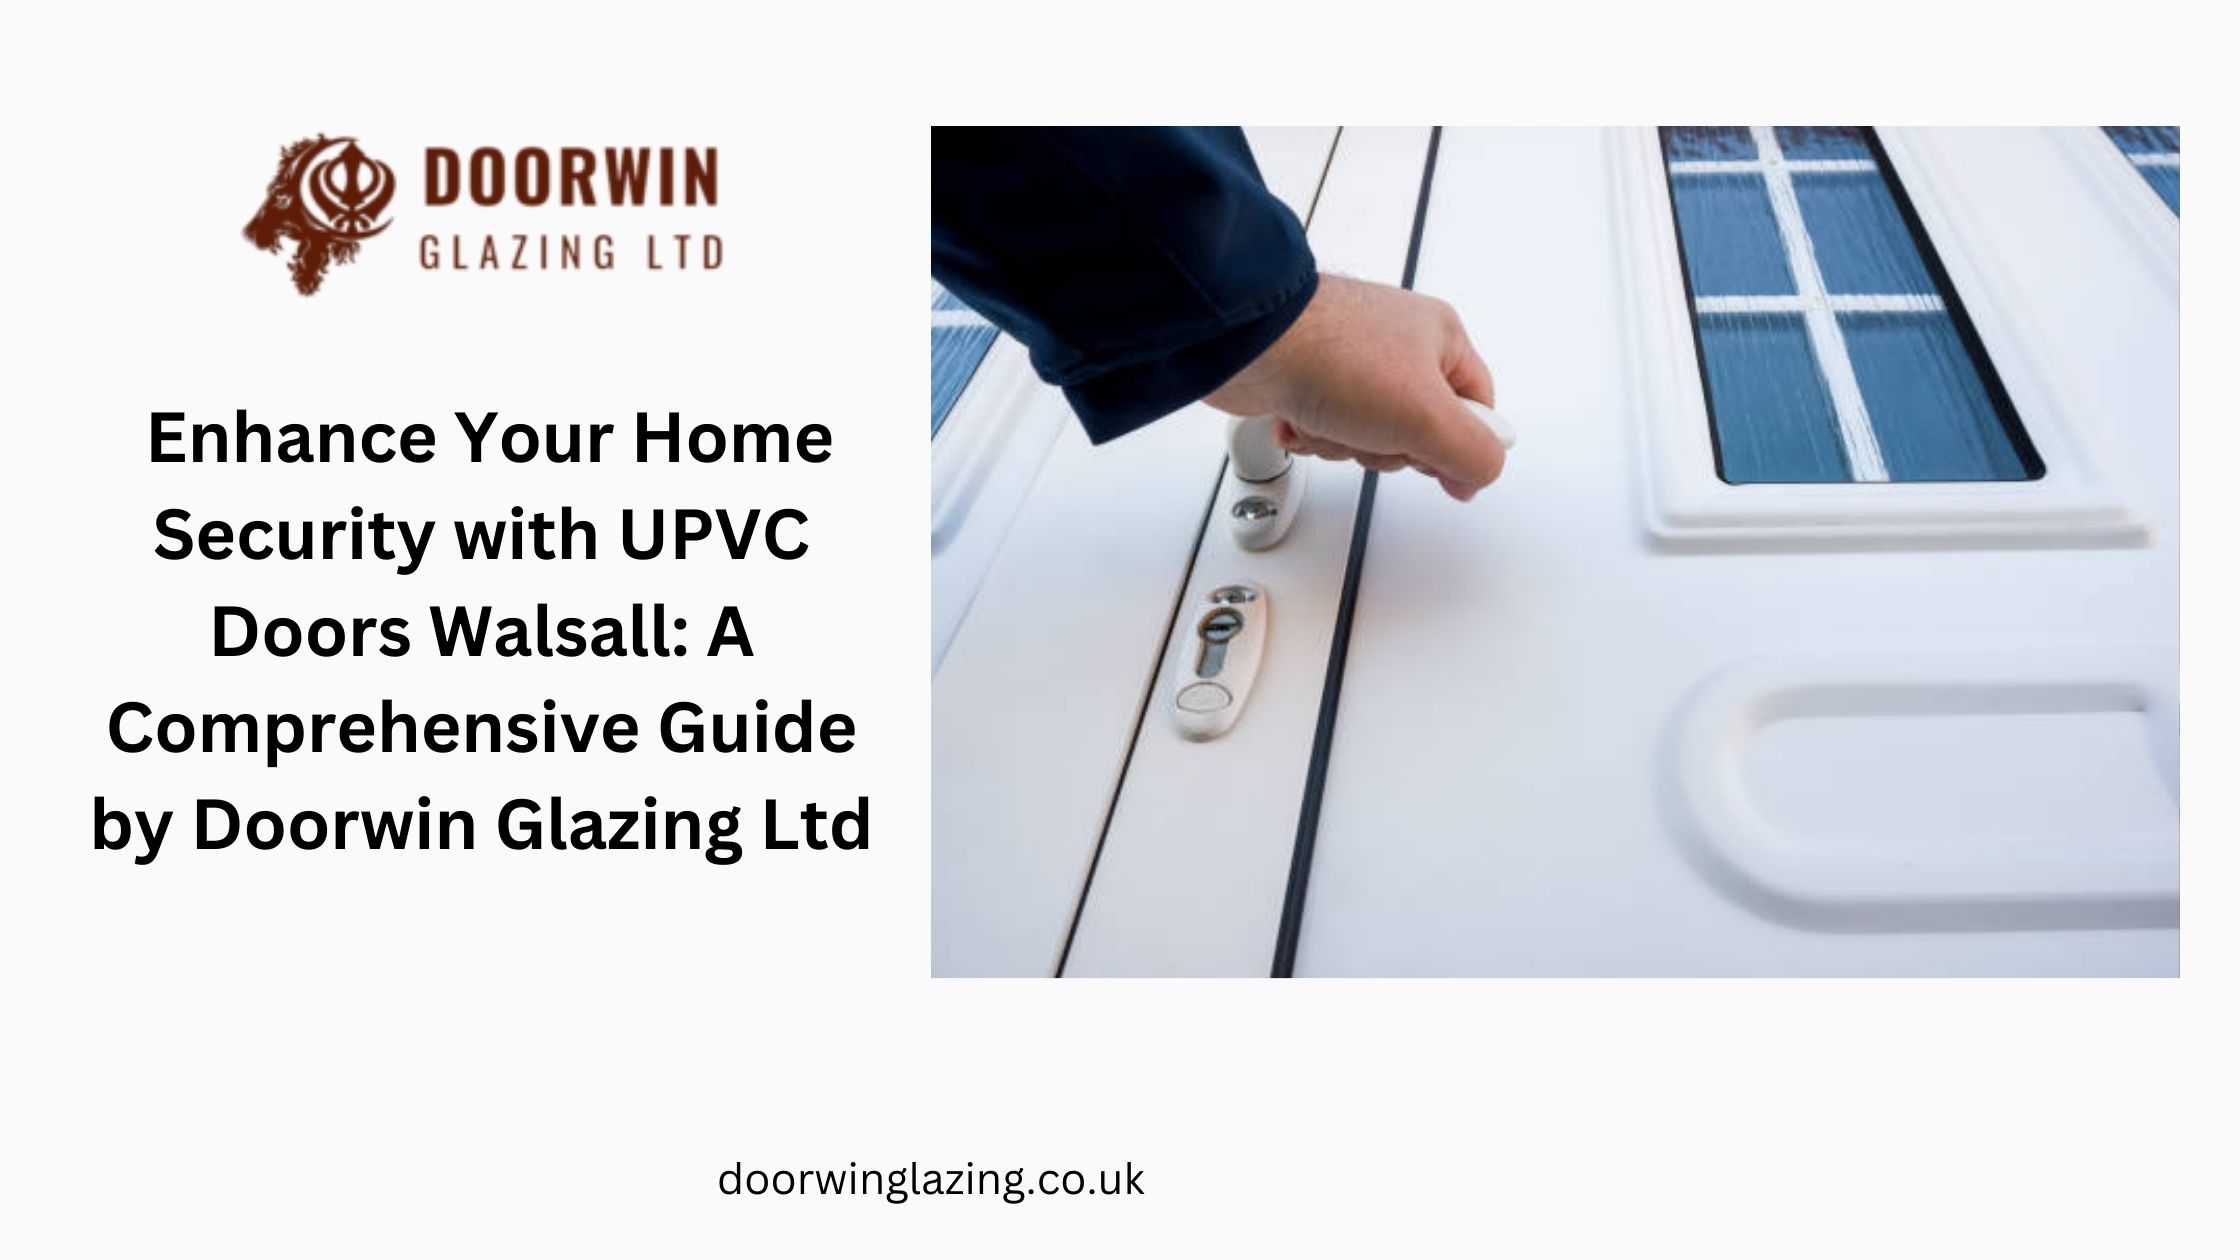 _Enhance Your Home Security with UPVC Doors Walsall A Comprehensive Guide by Doorwin Glazing Ltd.jpg